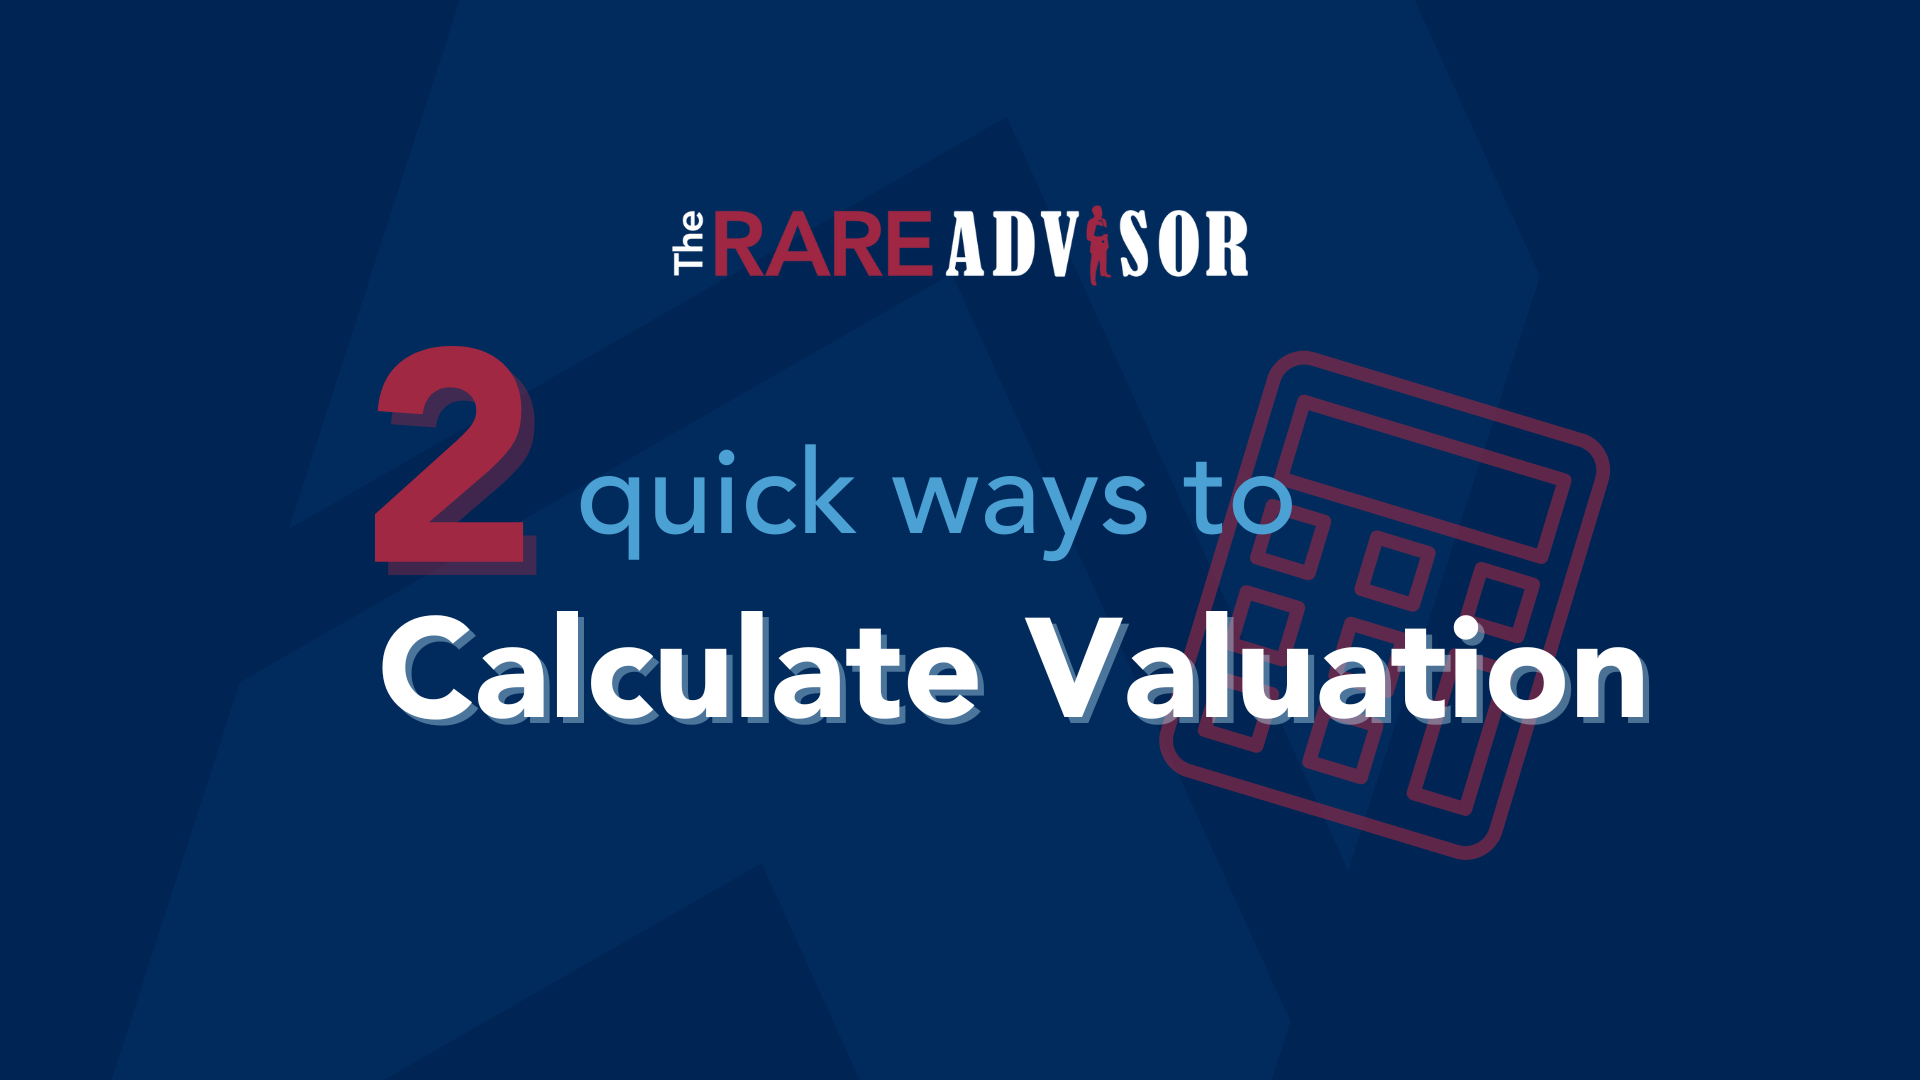 The RARE Advisor: 2 Quick Ways to Calculate Your Valuation